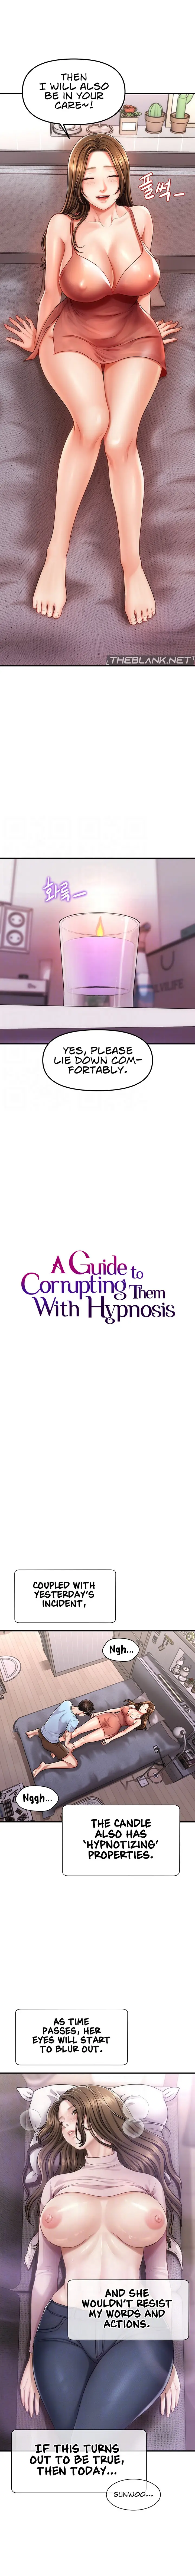 how-to-conquer-women-with-hypnosis-chap-3-2